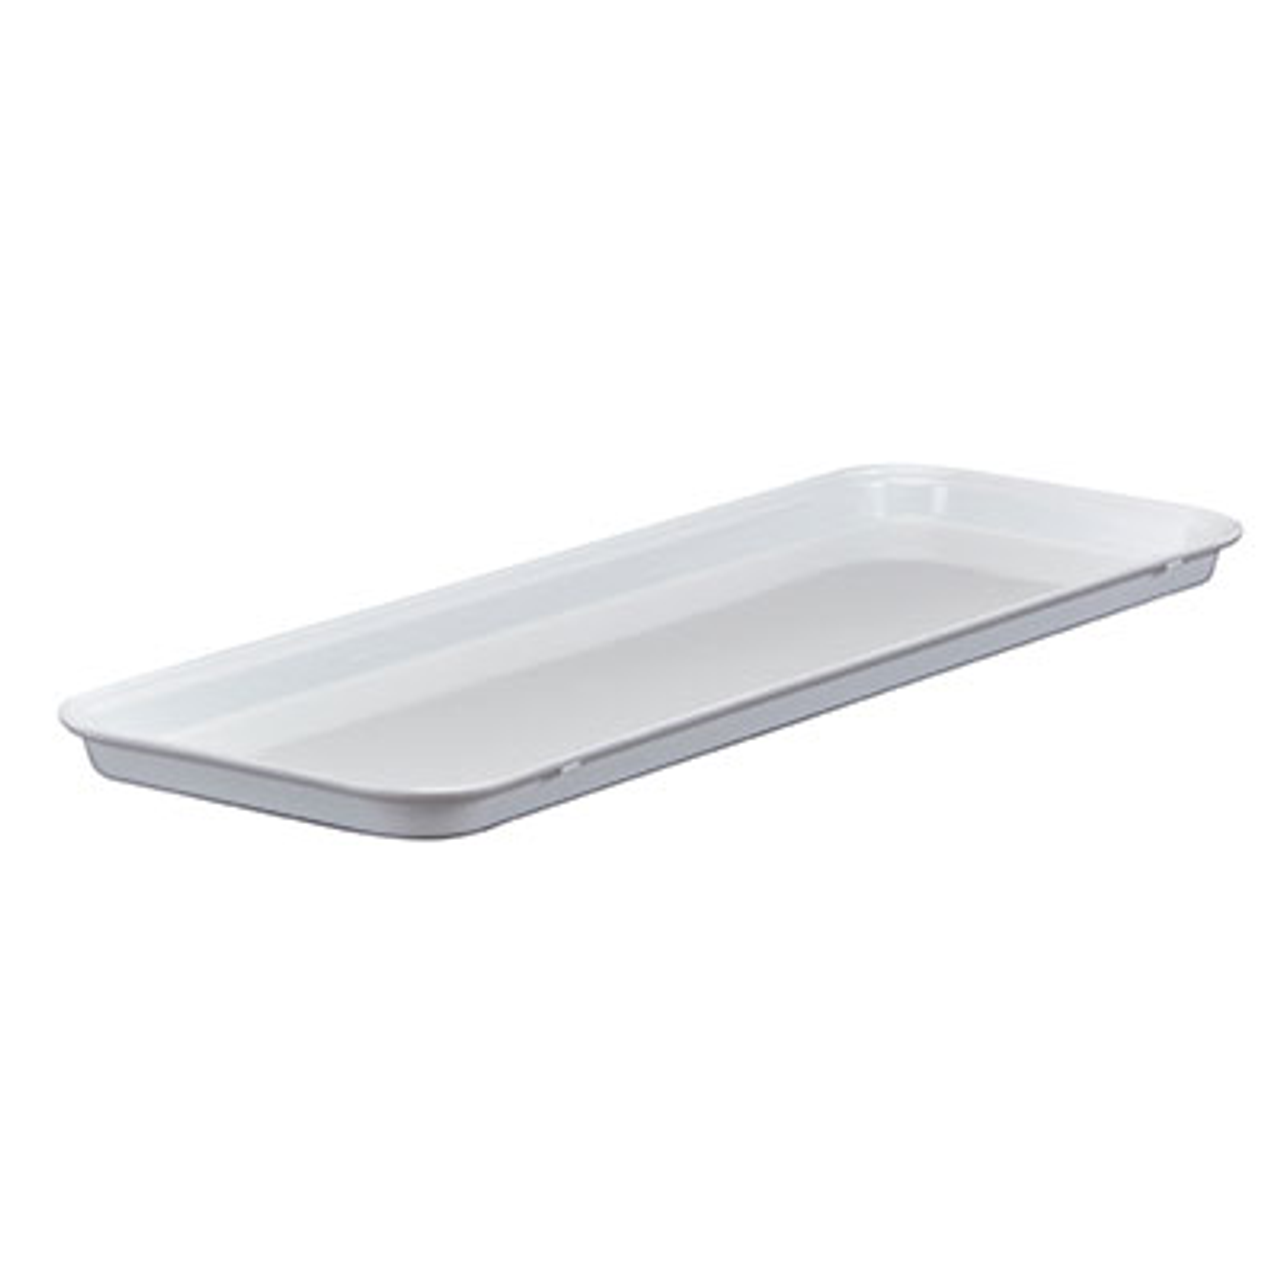 https://cdn11.bigcommerce.com/s-g3i86bef61/images/stencil/1280x1280/products/4106/2981/Cambro-926MT148-Market-Display-Tray__00058.1665176363.png?c=1